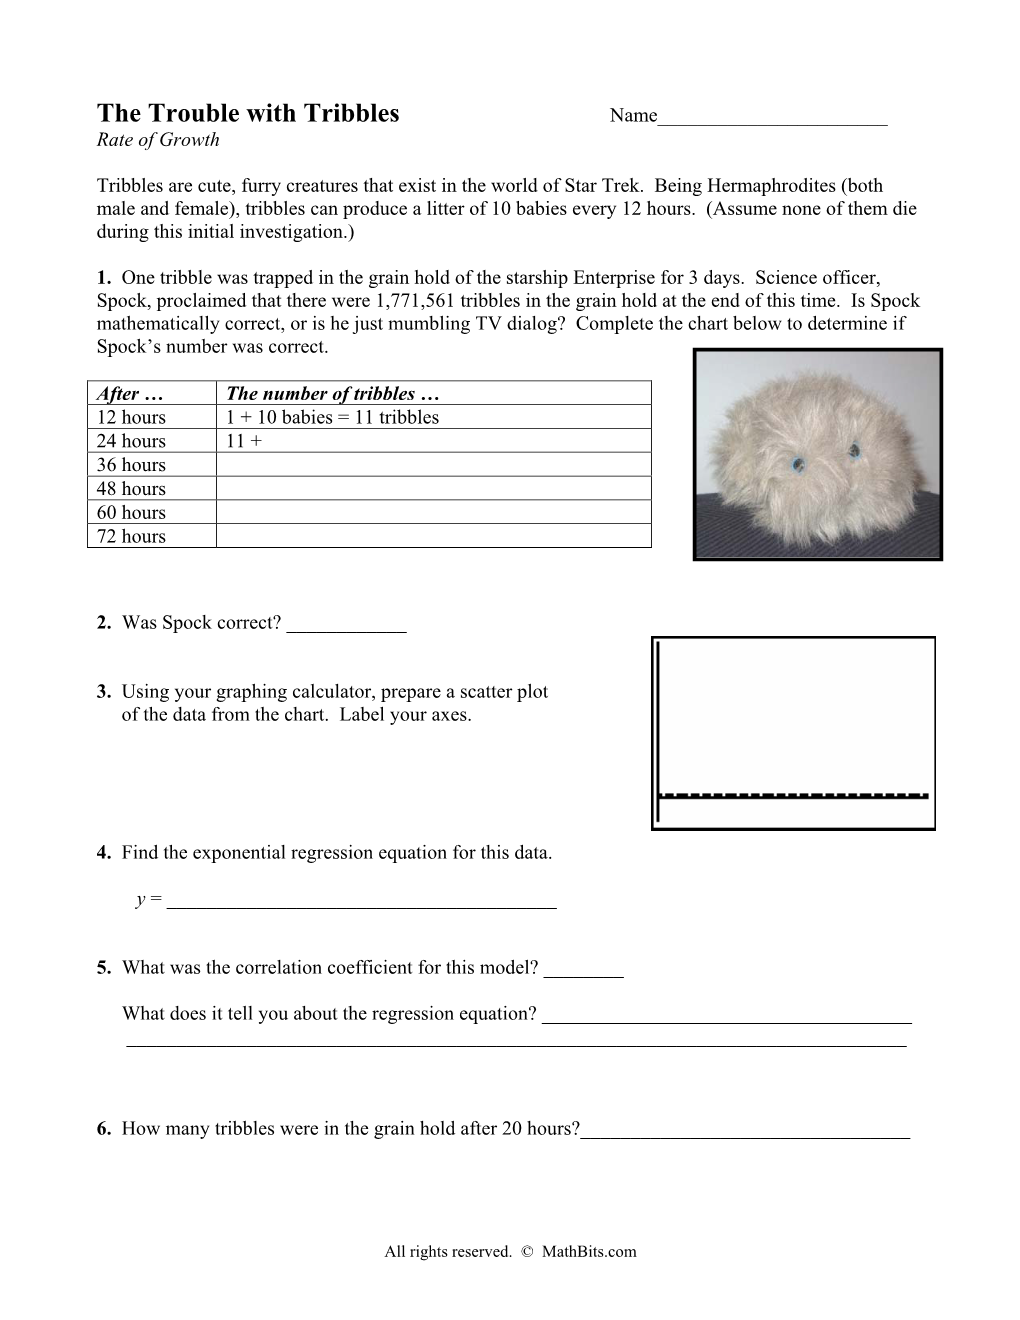 The Trouble with Tribbles Worksheet